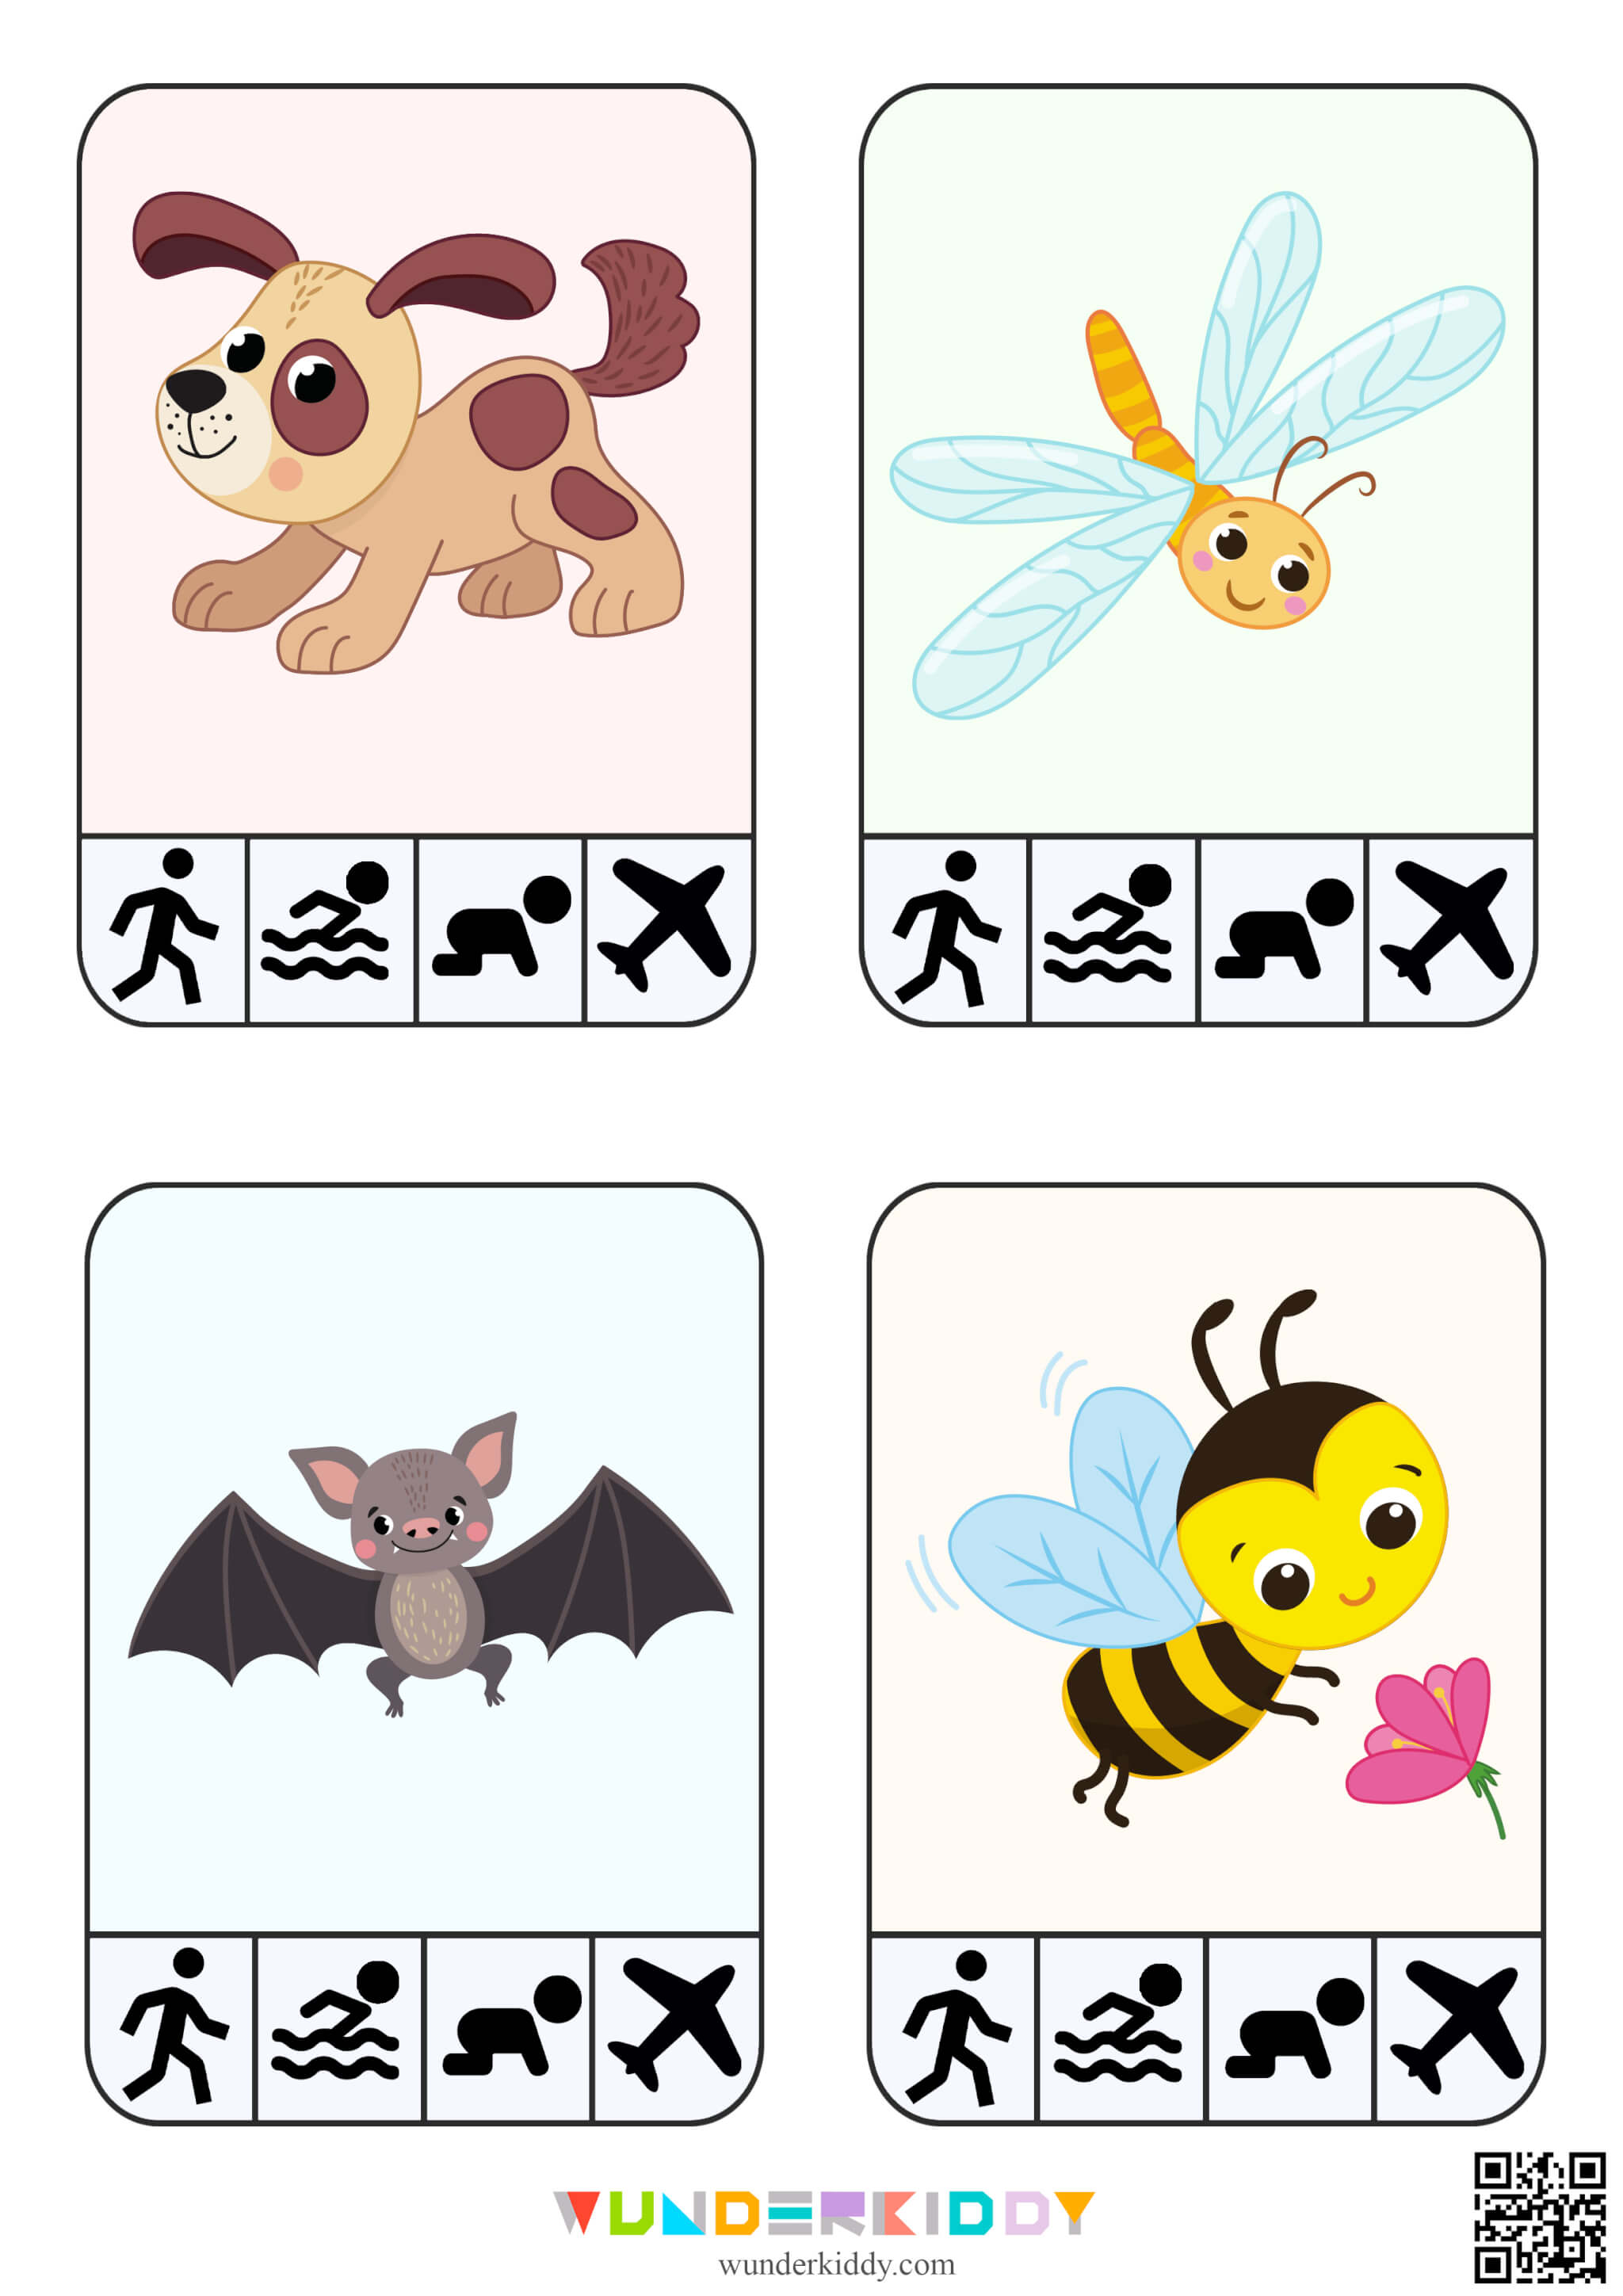 Animal Movements Activity for Kids - Image 7